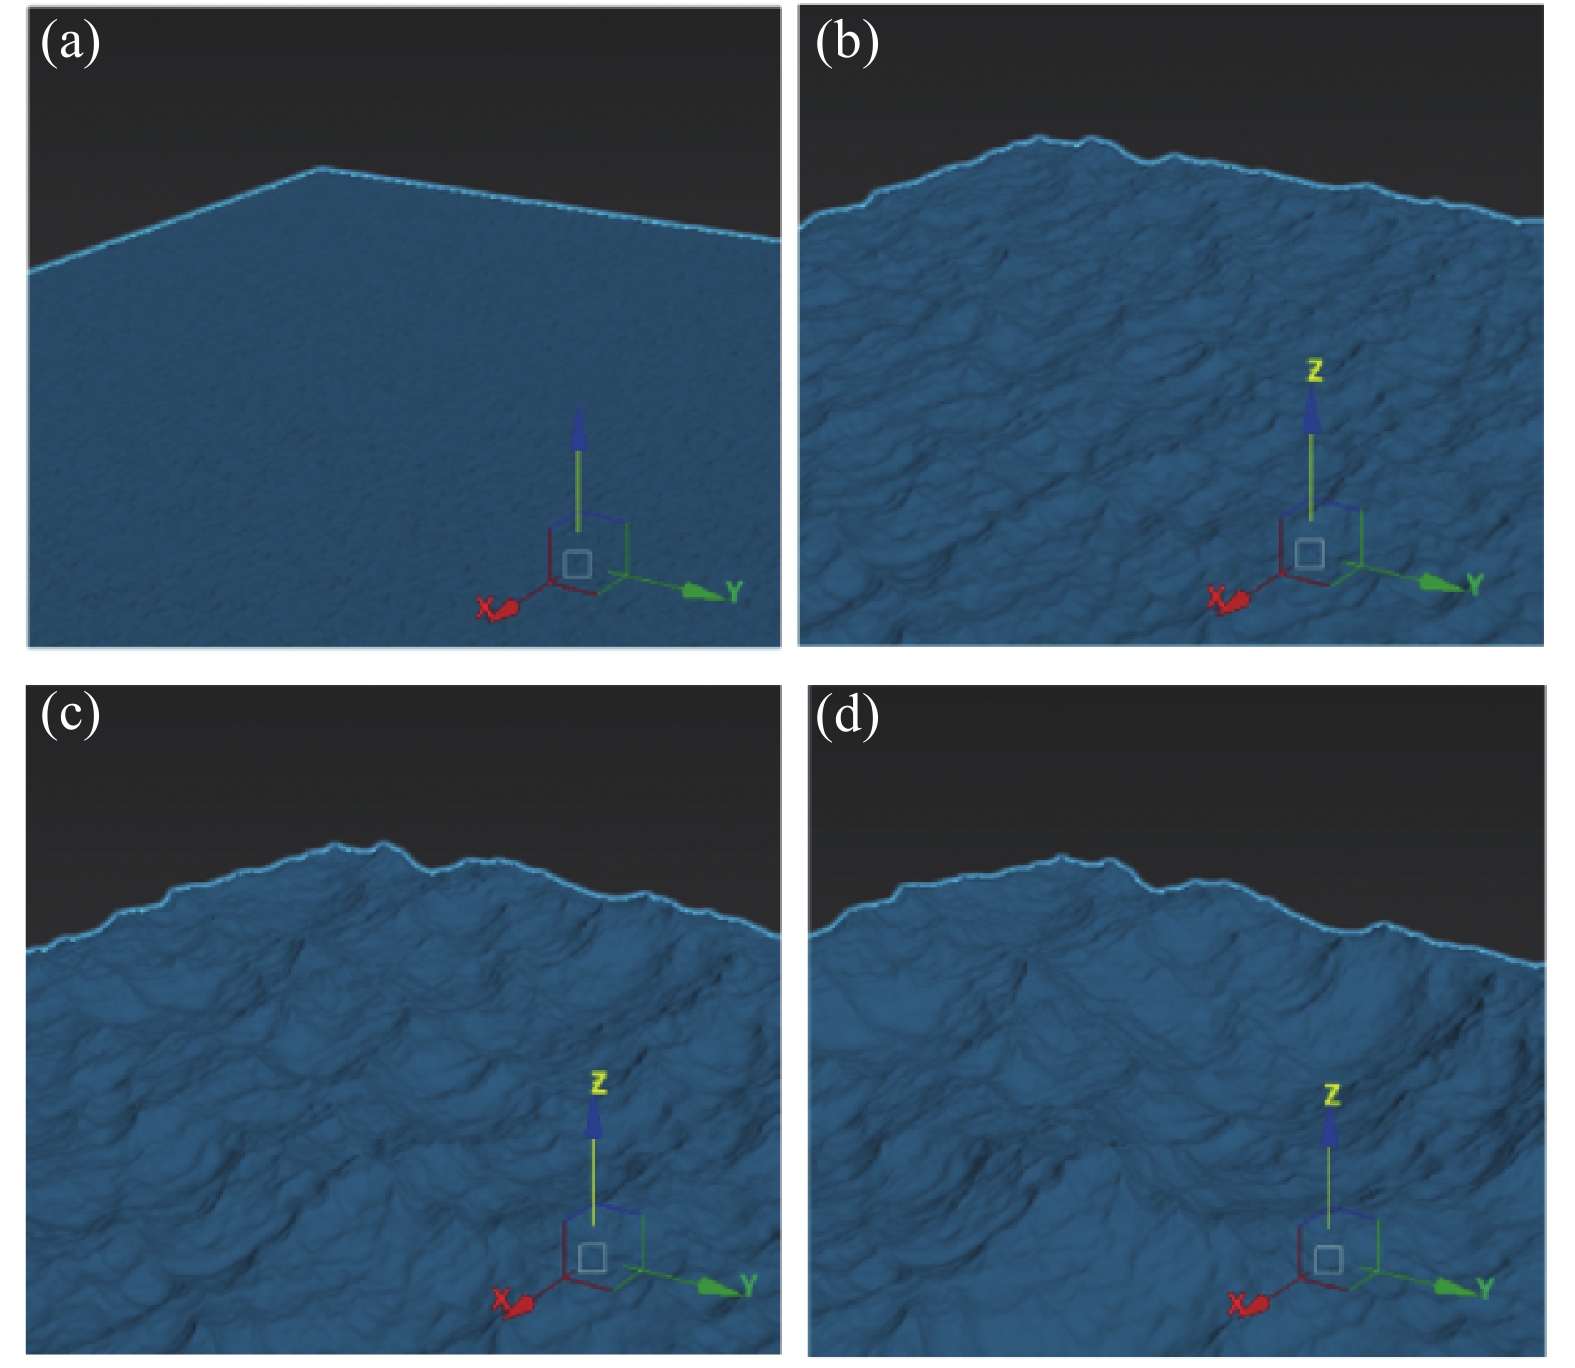 3D structure of the sea surface under different sea conditions. (a) Level 1 sea state; (b) Level 2 sea state; (c) Level 3 sea state; (d) Level 4 sea state